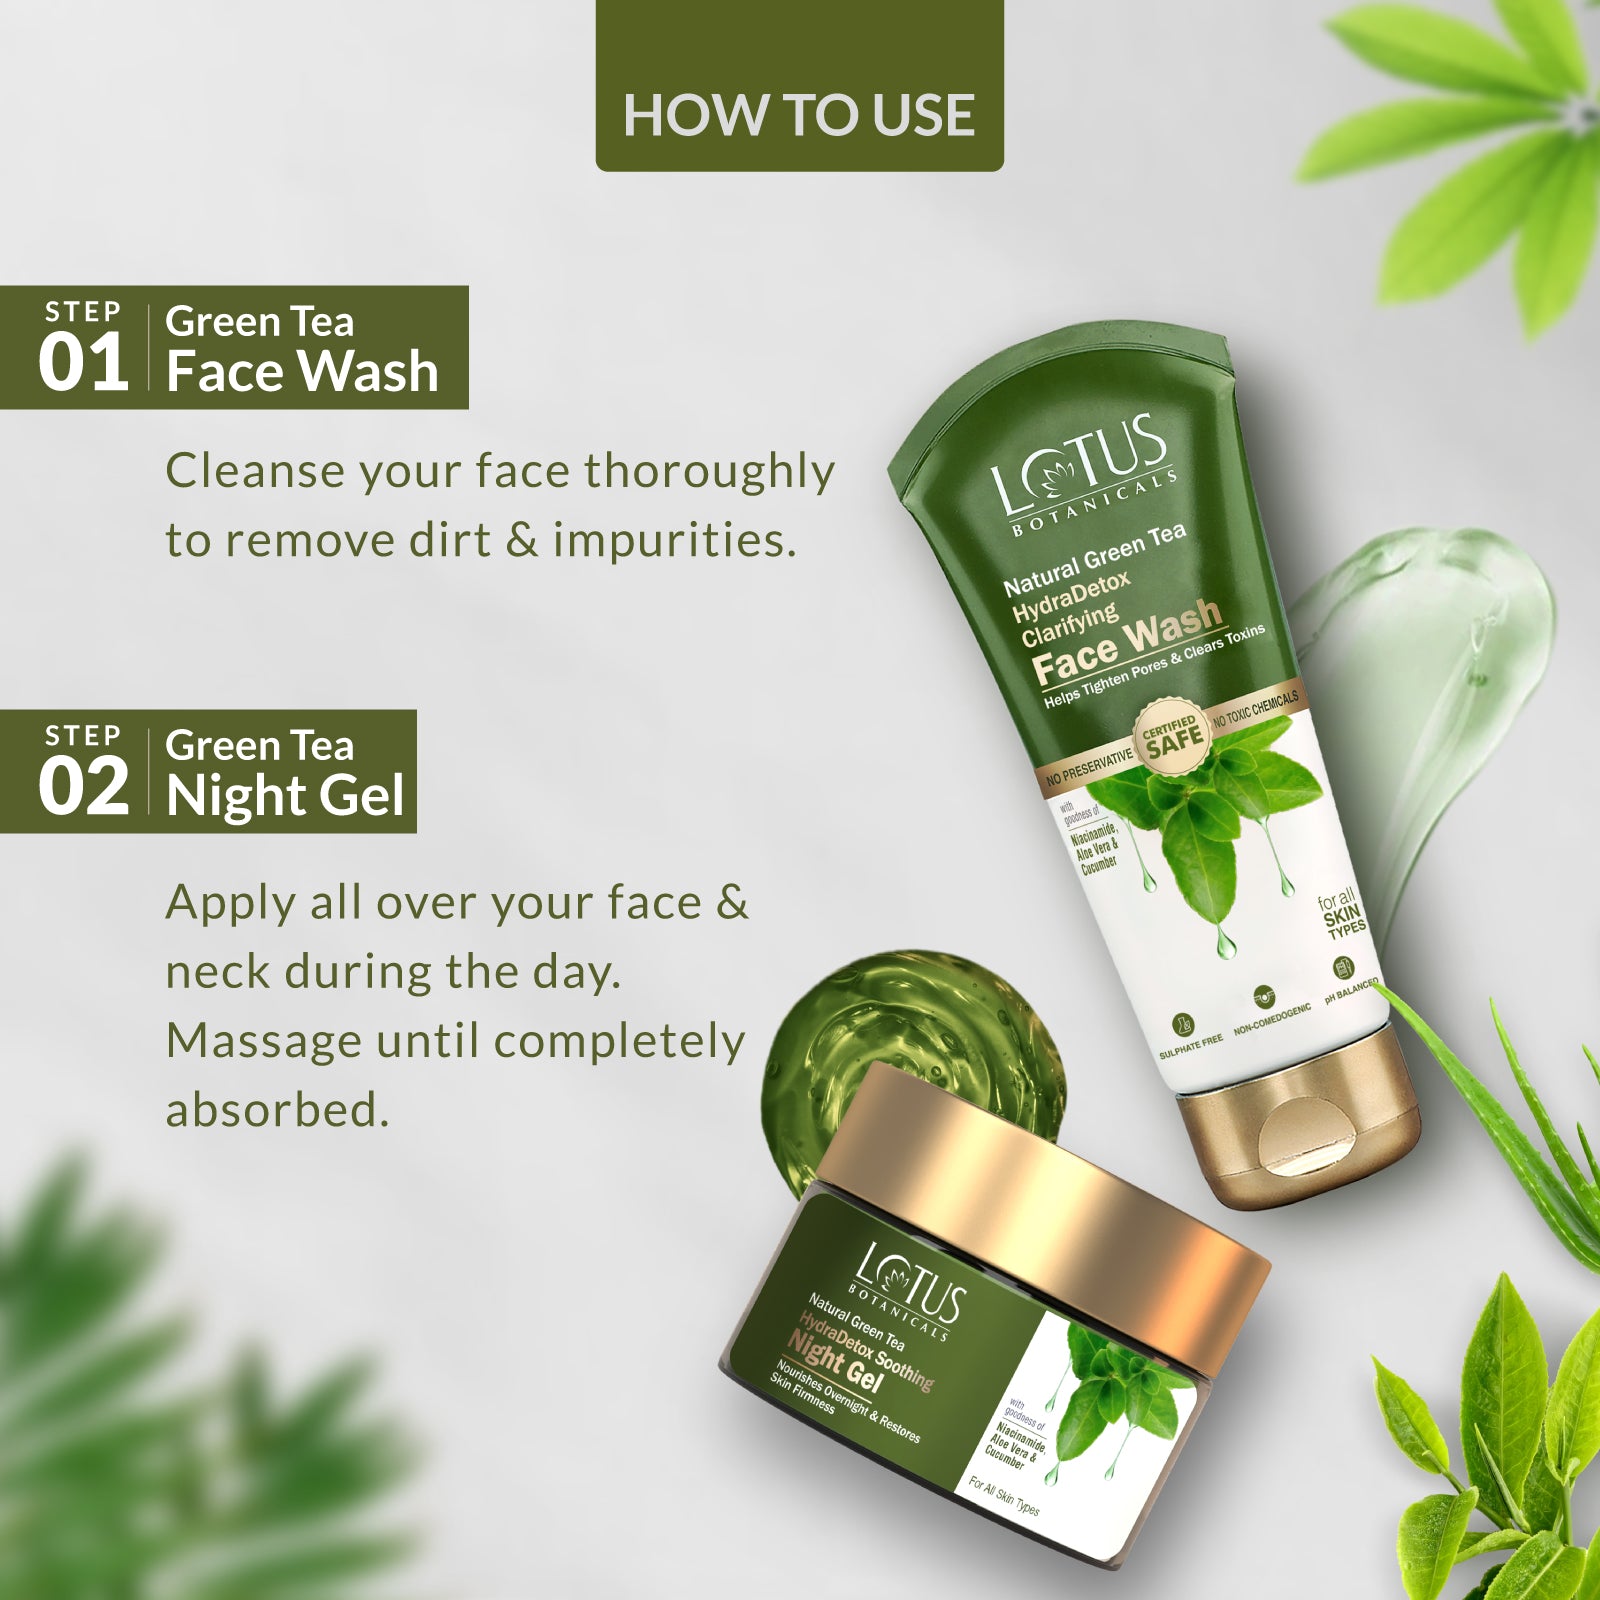 Green Tea Face Wash and Green Tea Night Gel - Free skincare combo with natural green tea extracts